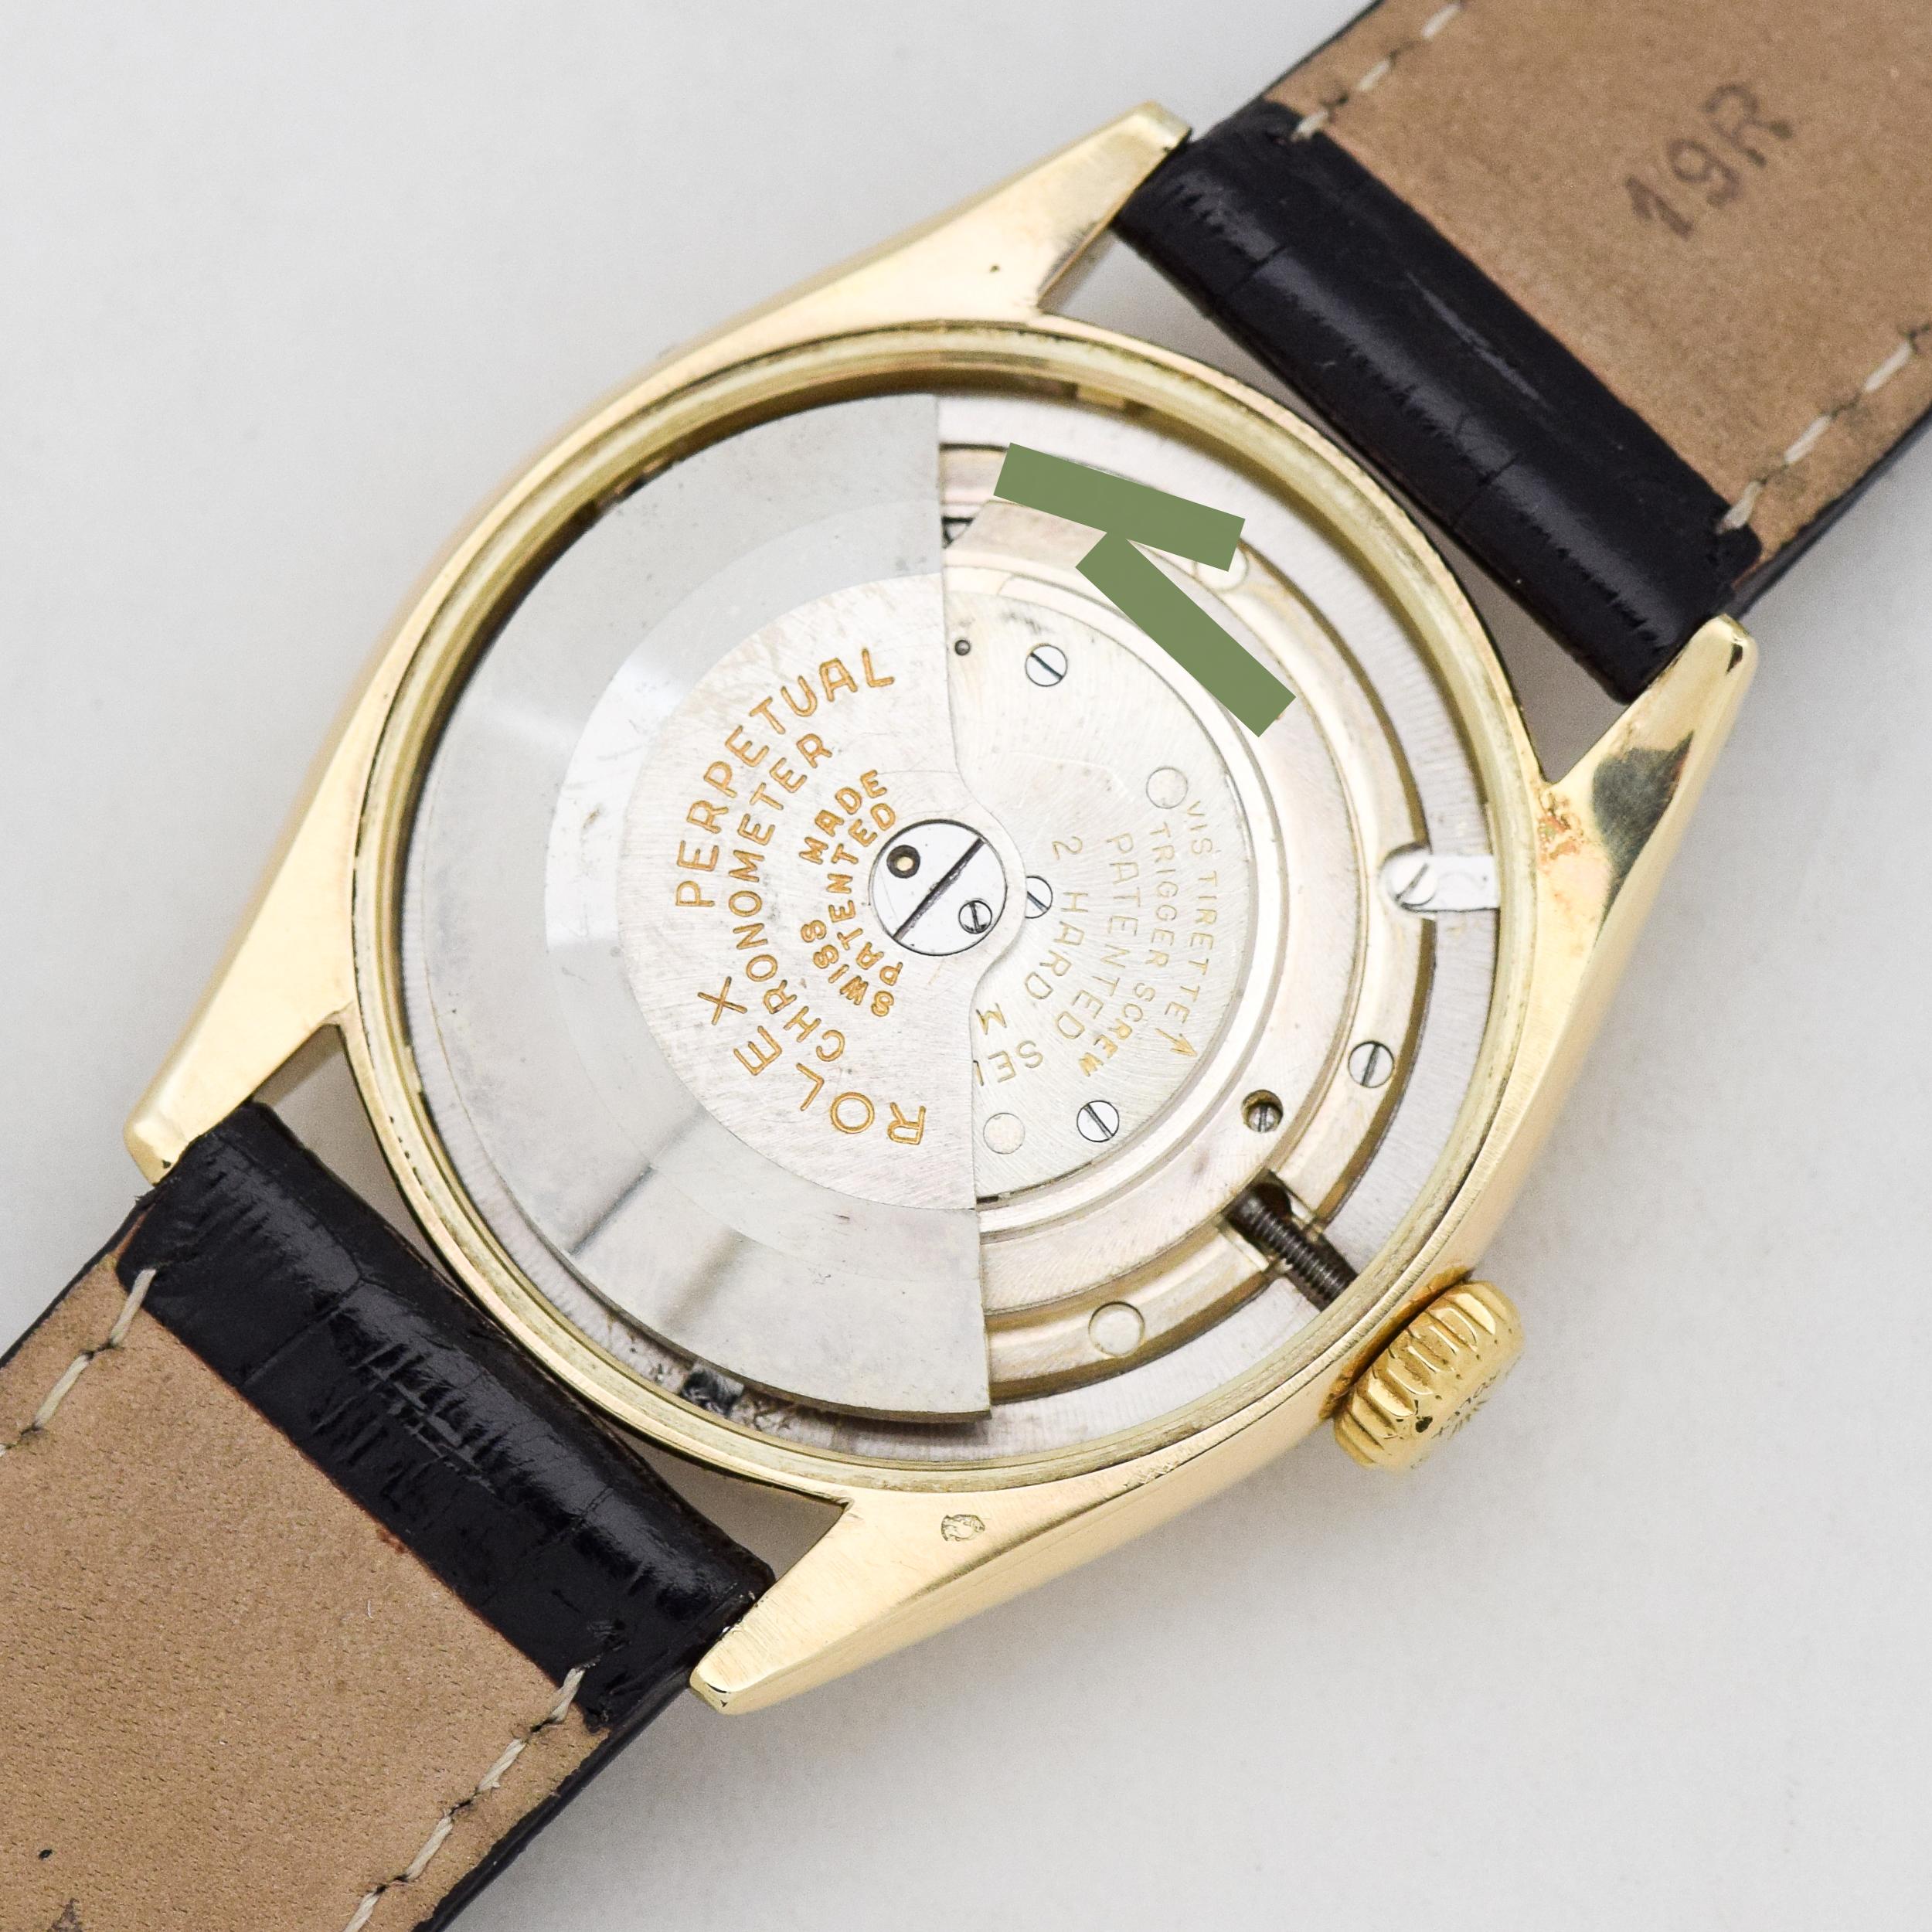 Vintage Rolex Oyster Perpetual Reference 6084 14 Karat Yellow Gold Watch, 1951 4